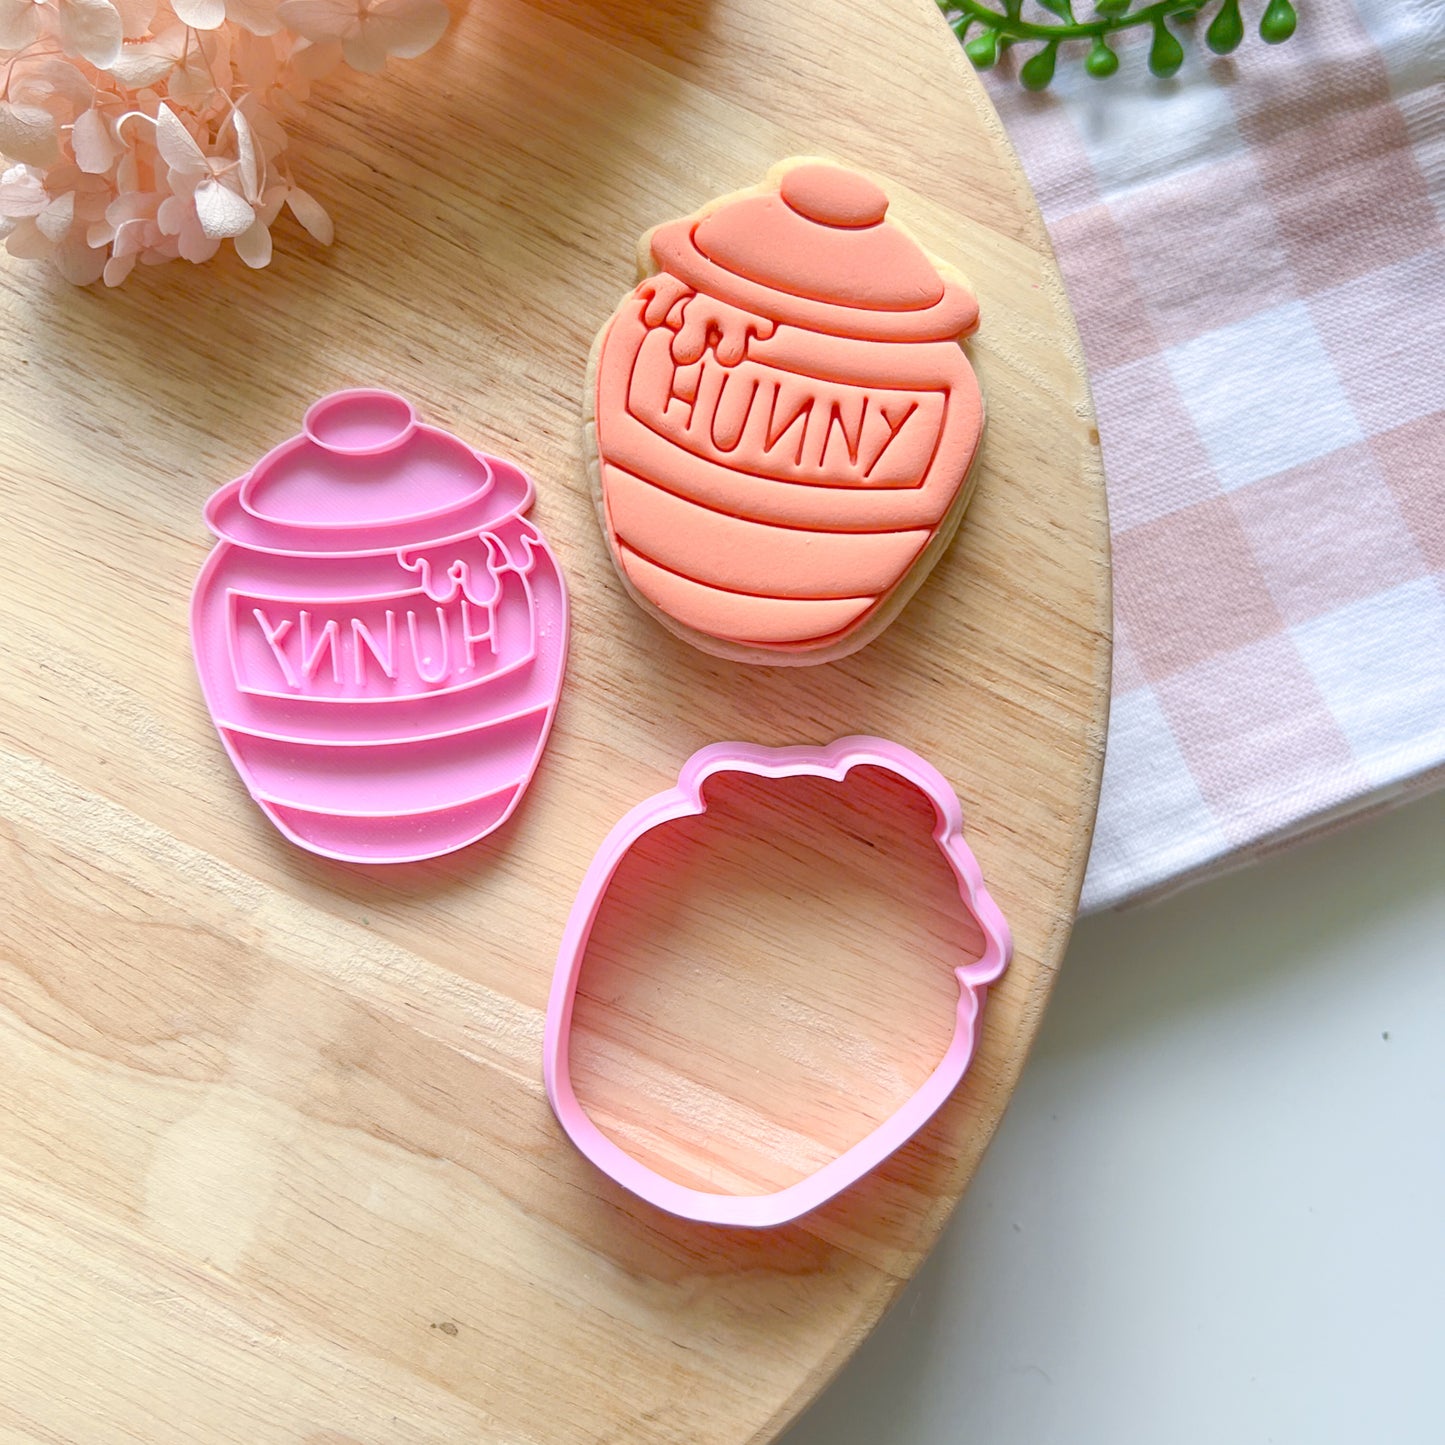 Hunny Pot - Cookie Cutter & Stamp